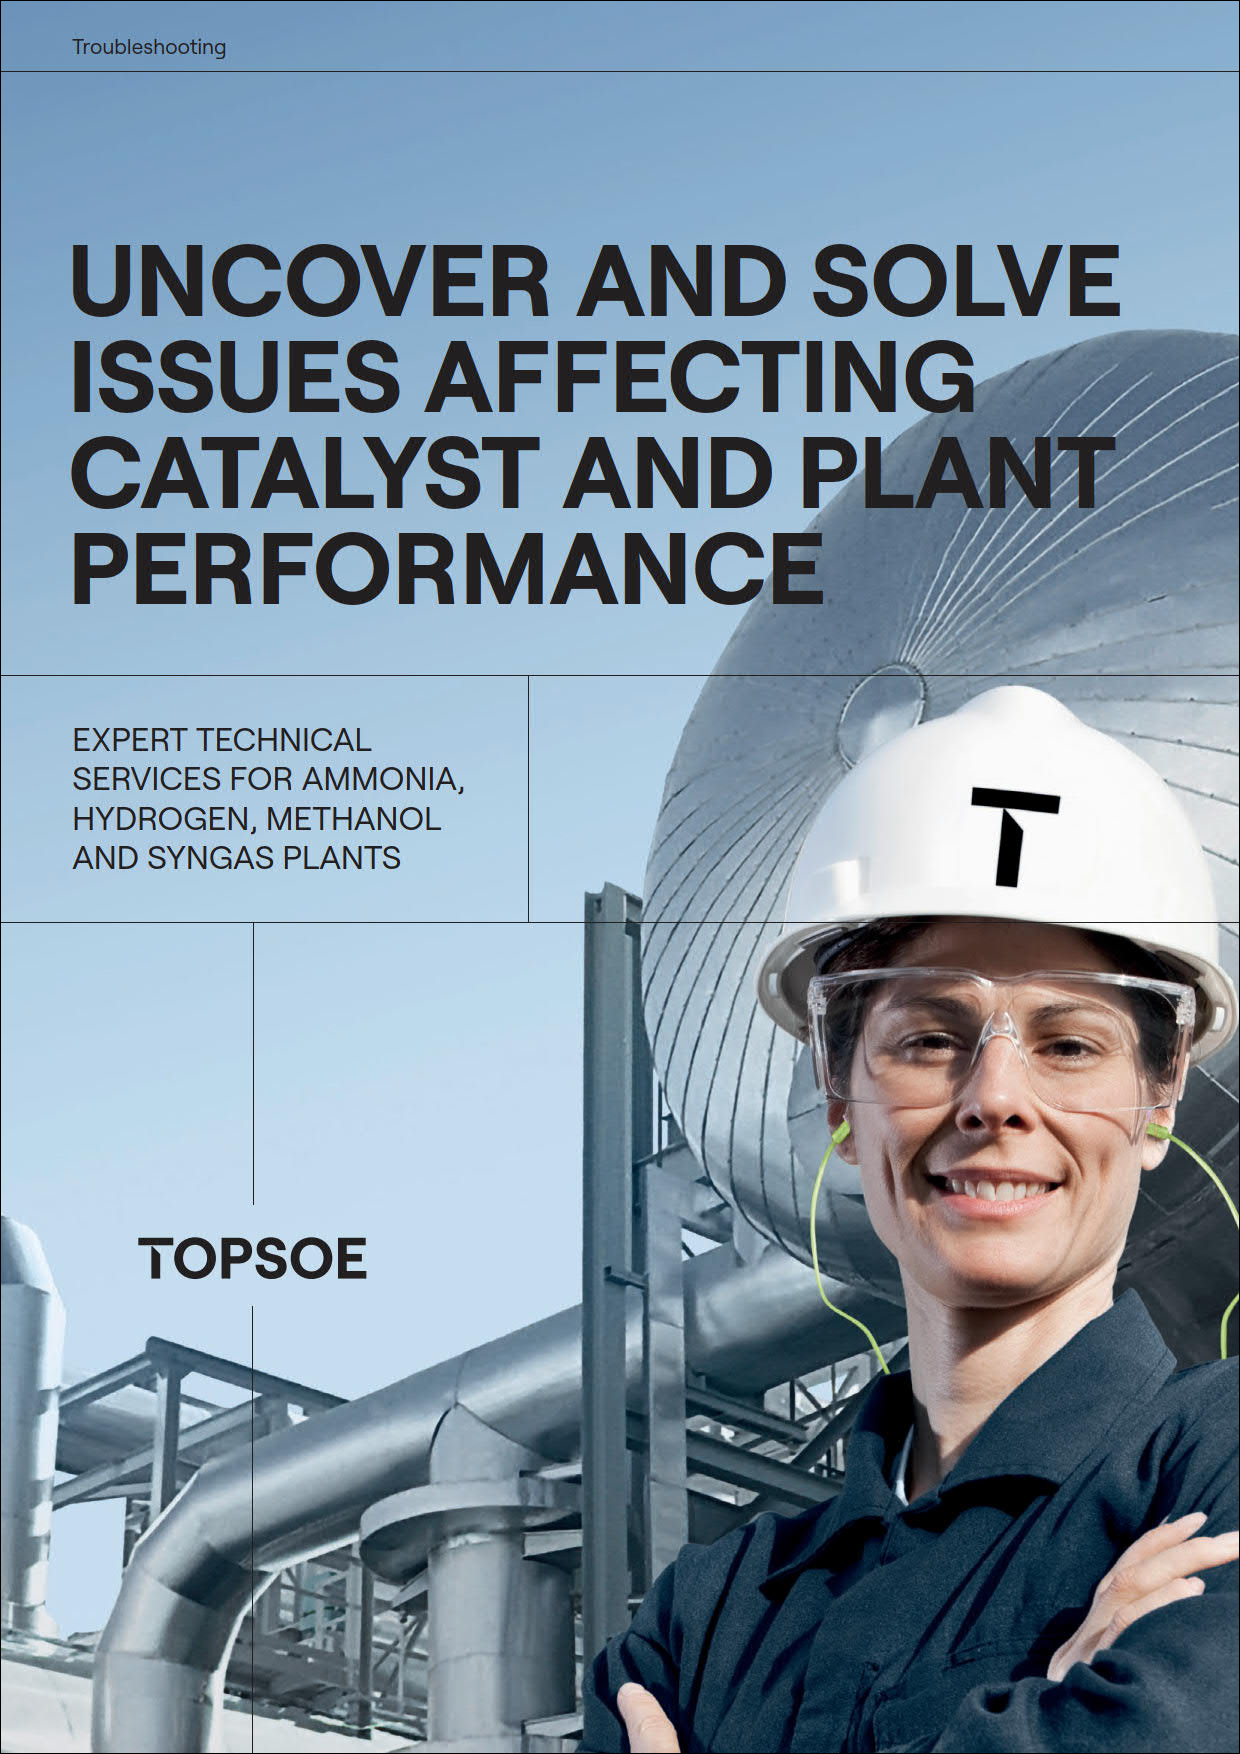 Uncover and solve issues affecting catalyst and plant performance